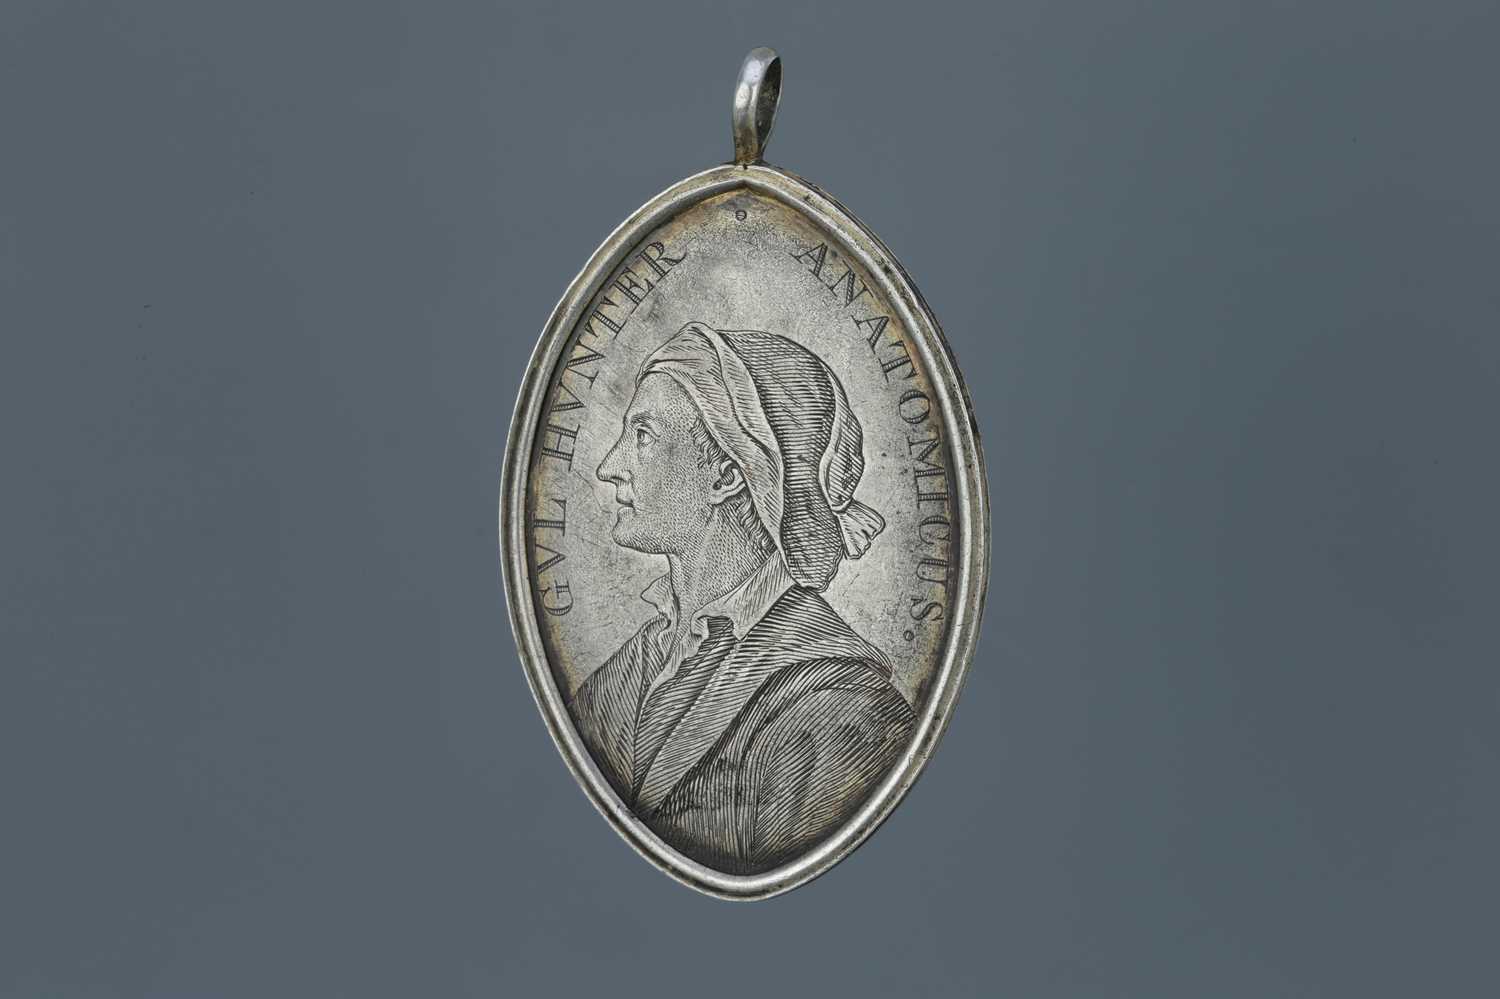 Lot 72 - Scottish Silver Medal/Medallion for Andrew Crawford Surgeon, Glasgow